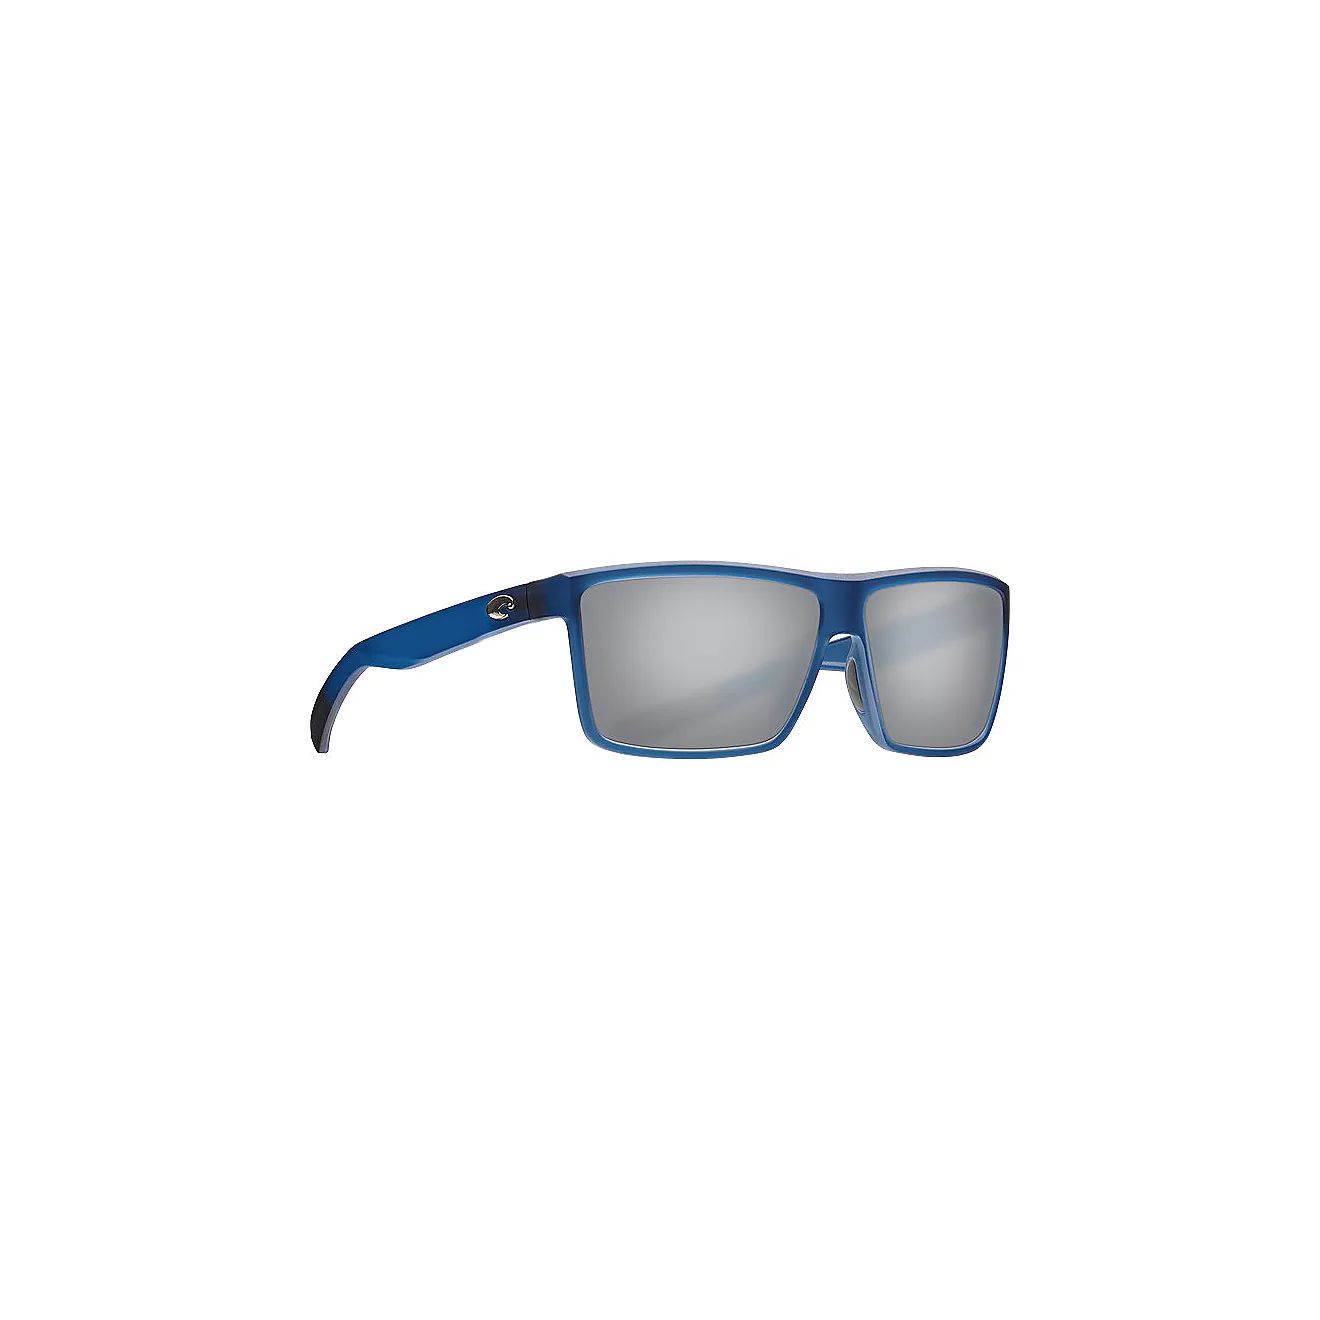 Costa Del Mar Riconcito Sunglasses | Free Shipping at Academy | Academy Sports + Outdoors